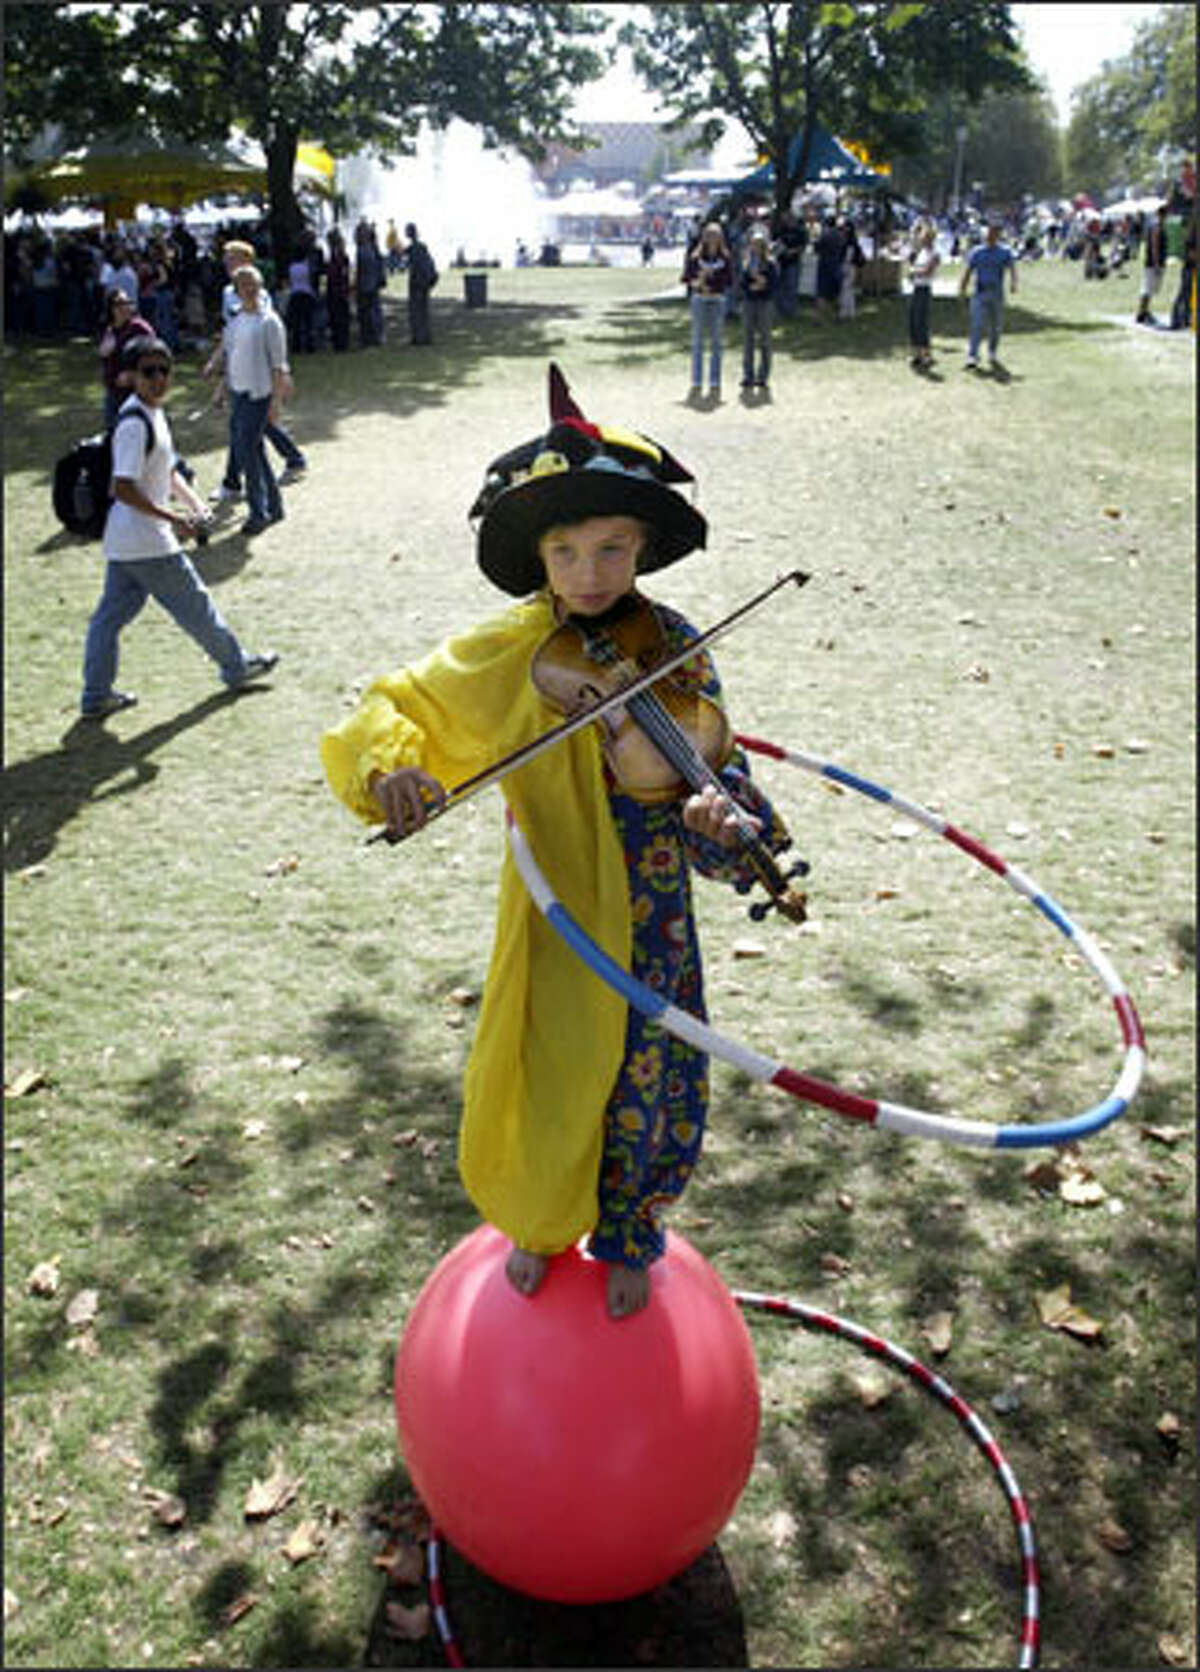 Balancing on a rubber ball and twirling a hula hoop, 9-year-old Una Bennett plays the violin at Bumbershoot. She and her juggling brother, Ezra Weill, 12, can earn $200 to $300 a day.